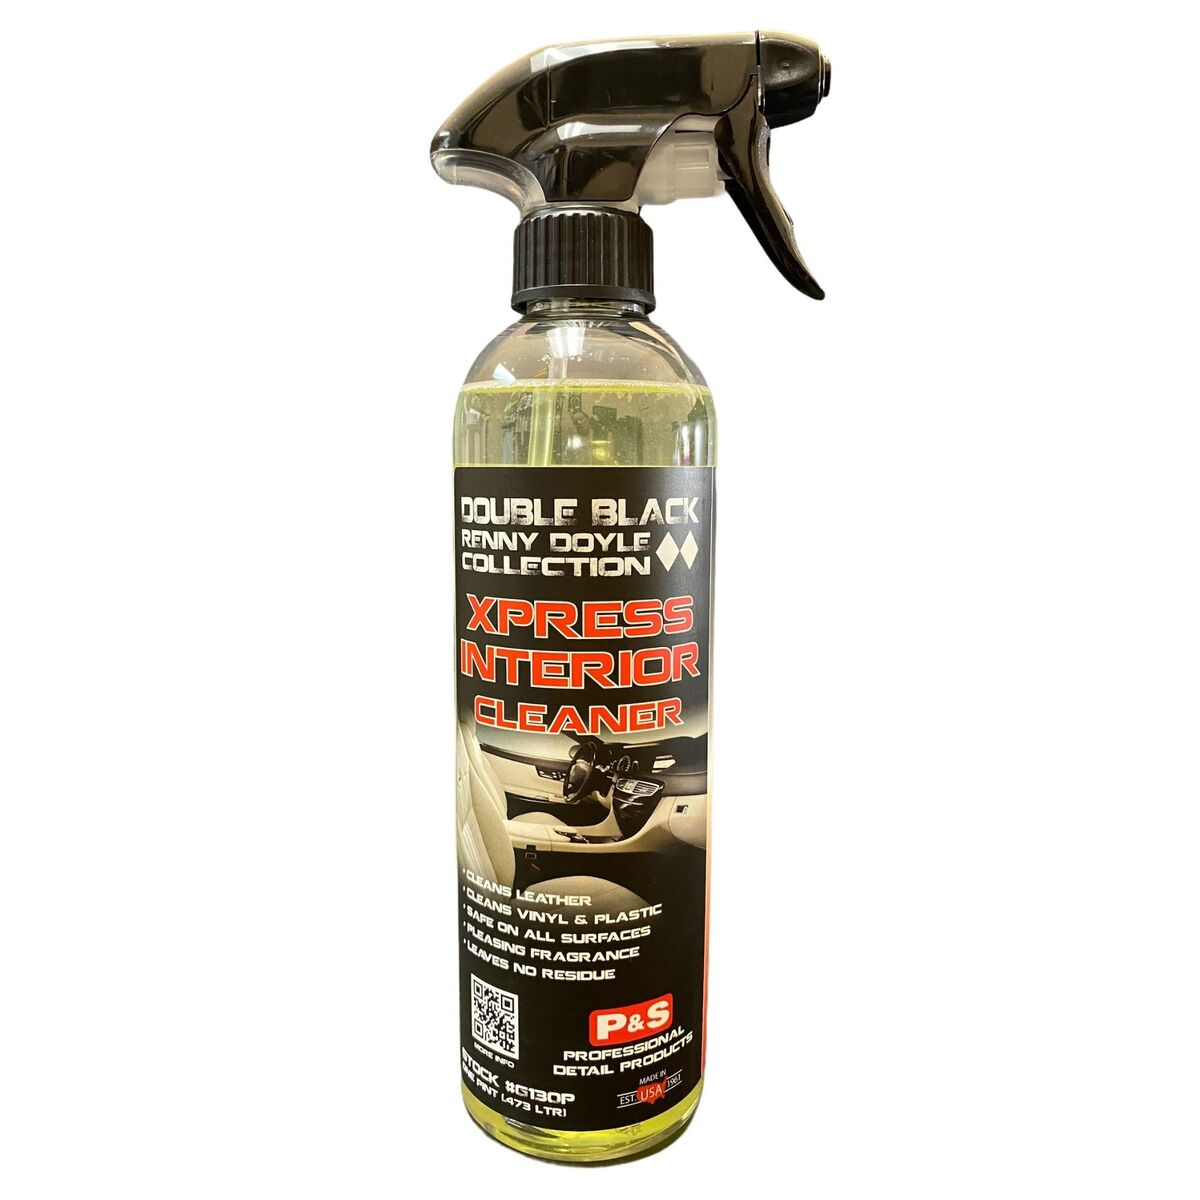 P&S Xpress Interior Cleaner, Safe on Leather and Plastic, No Residue